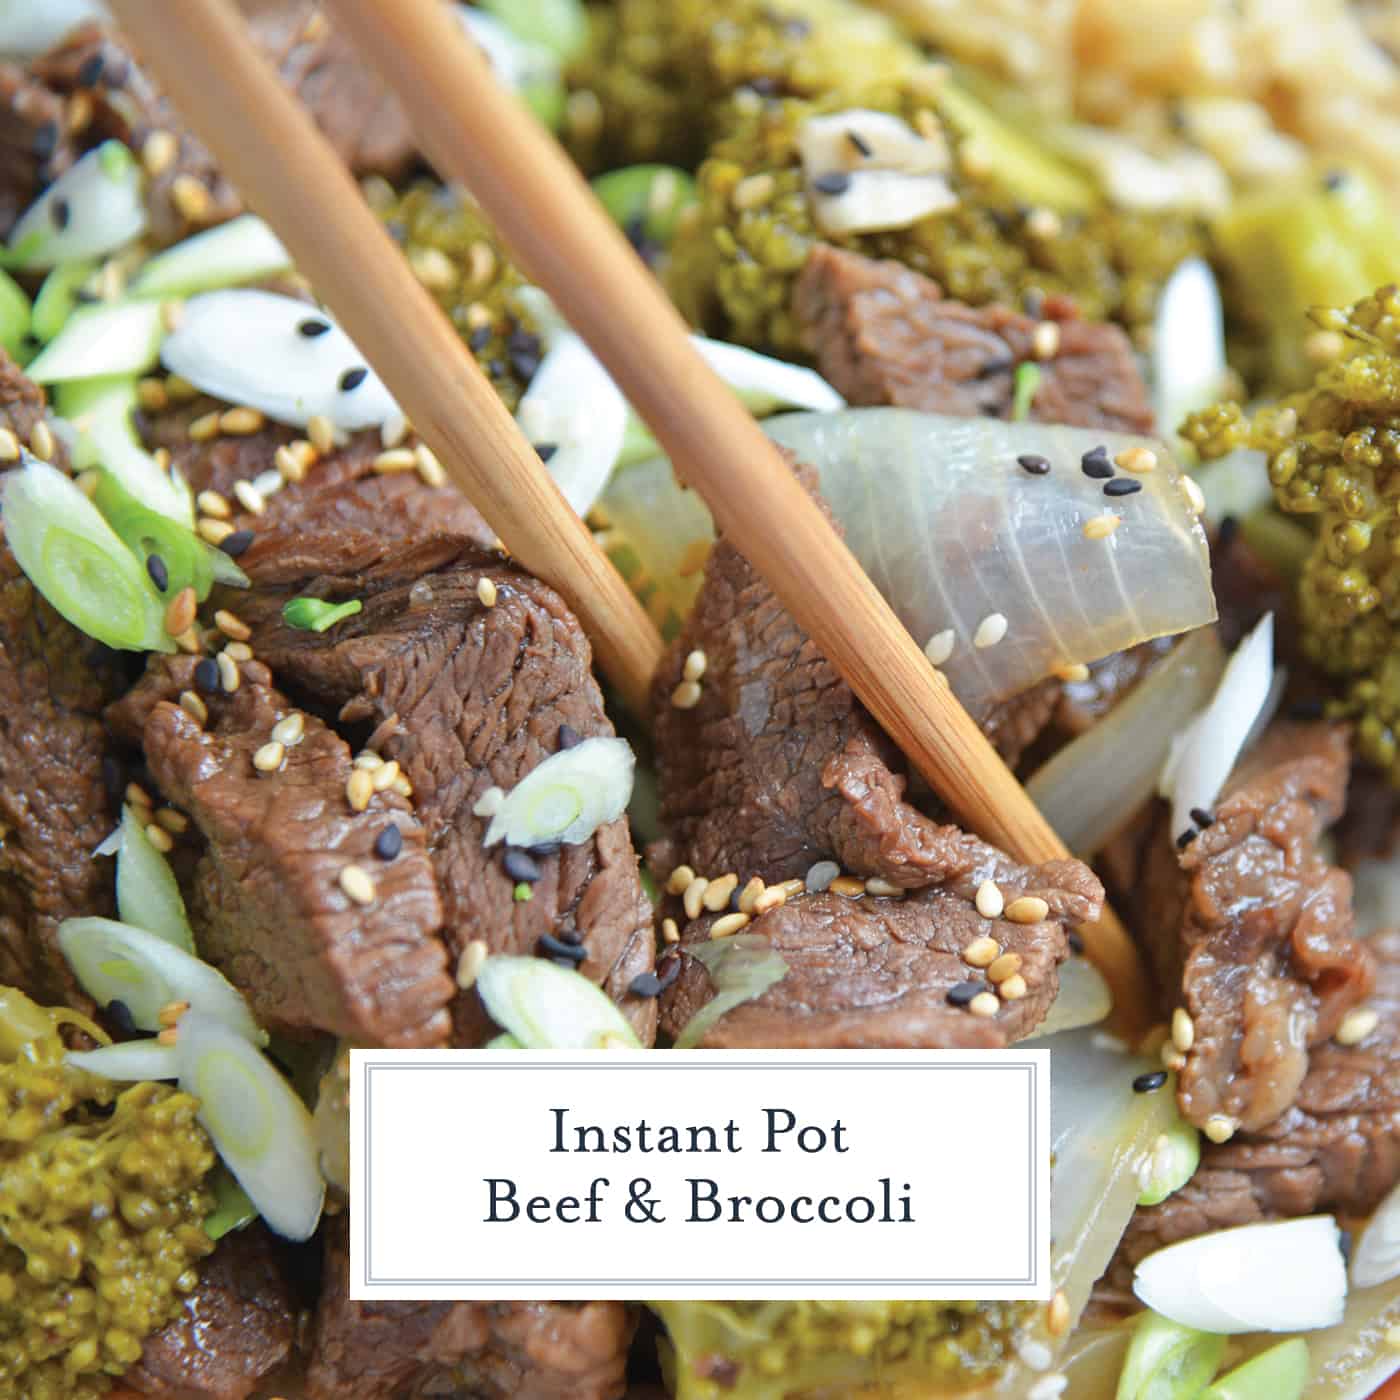 Instant Pot Beef and Broccoli is a quick, easy and healthy alternative to your favorite Chinese takeout dish. Ready in just 30 minutes! #beefandbroccoli #instantpotrecipes www.savoryexperiments.com